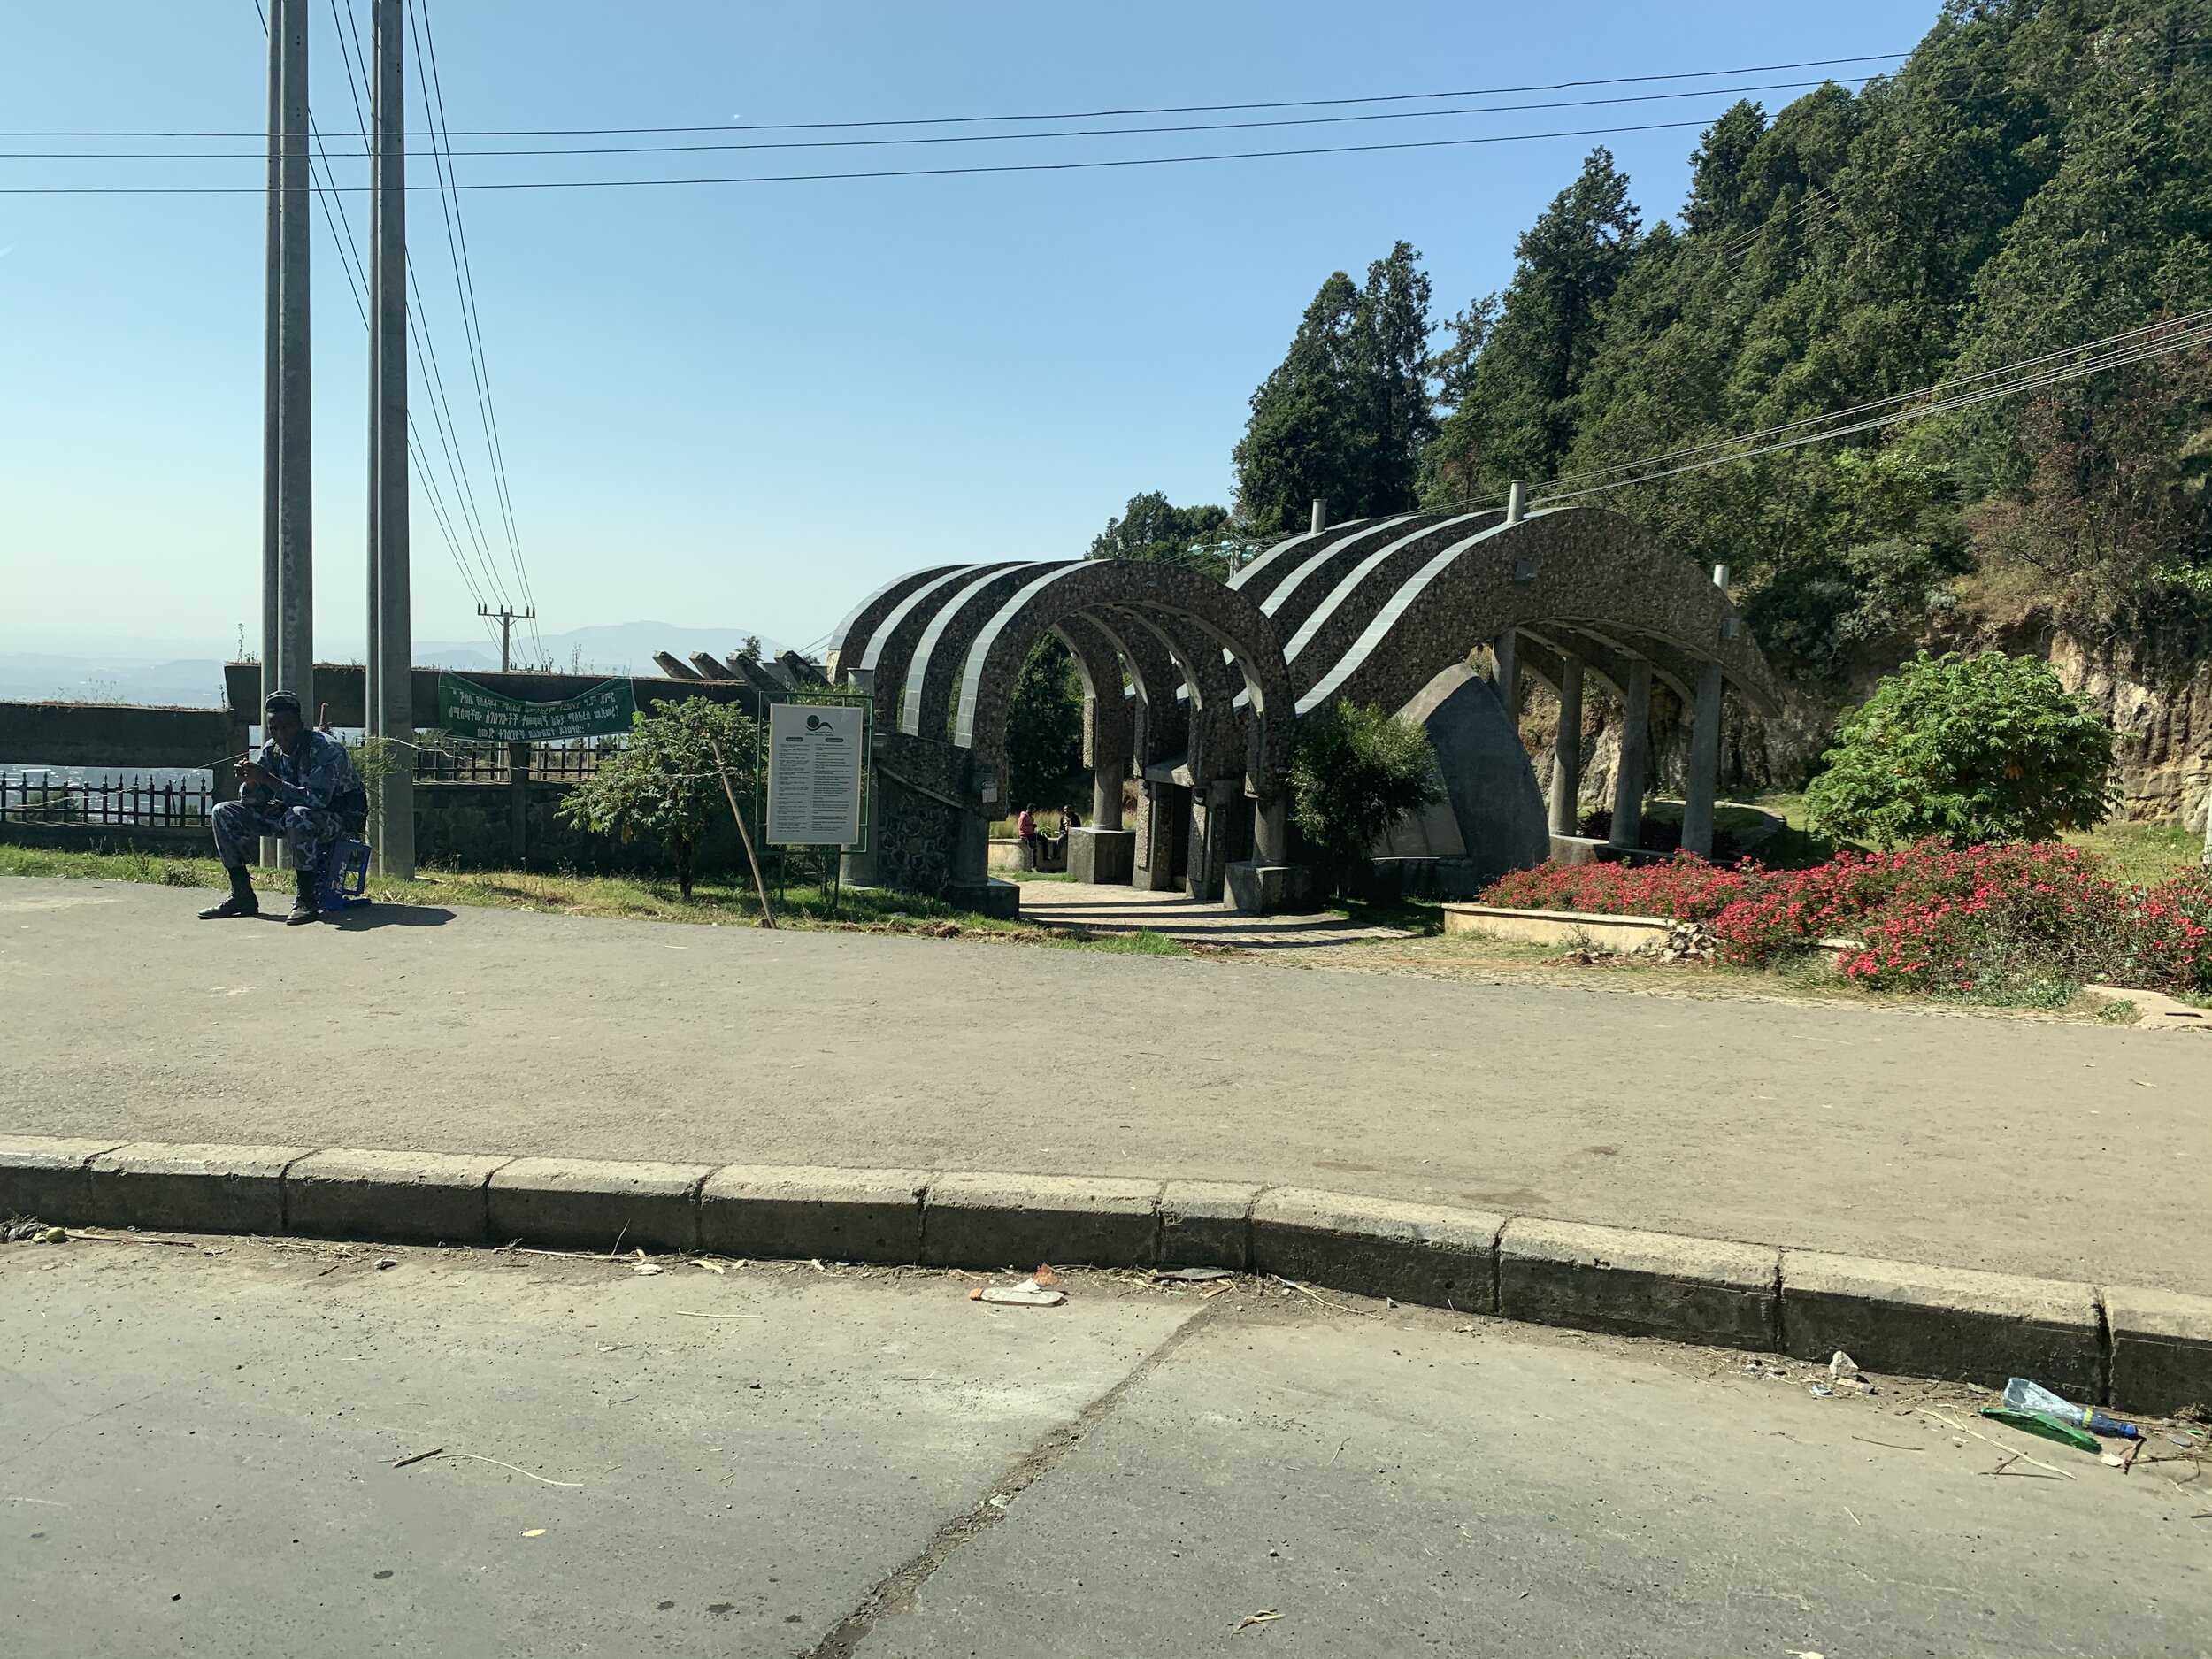 The entrance to the Gulele Botanical Gardens, where soldiers check IDs entering Addis (from Oromia).